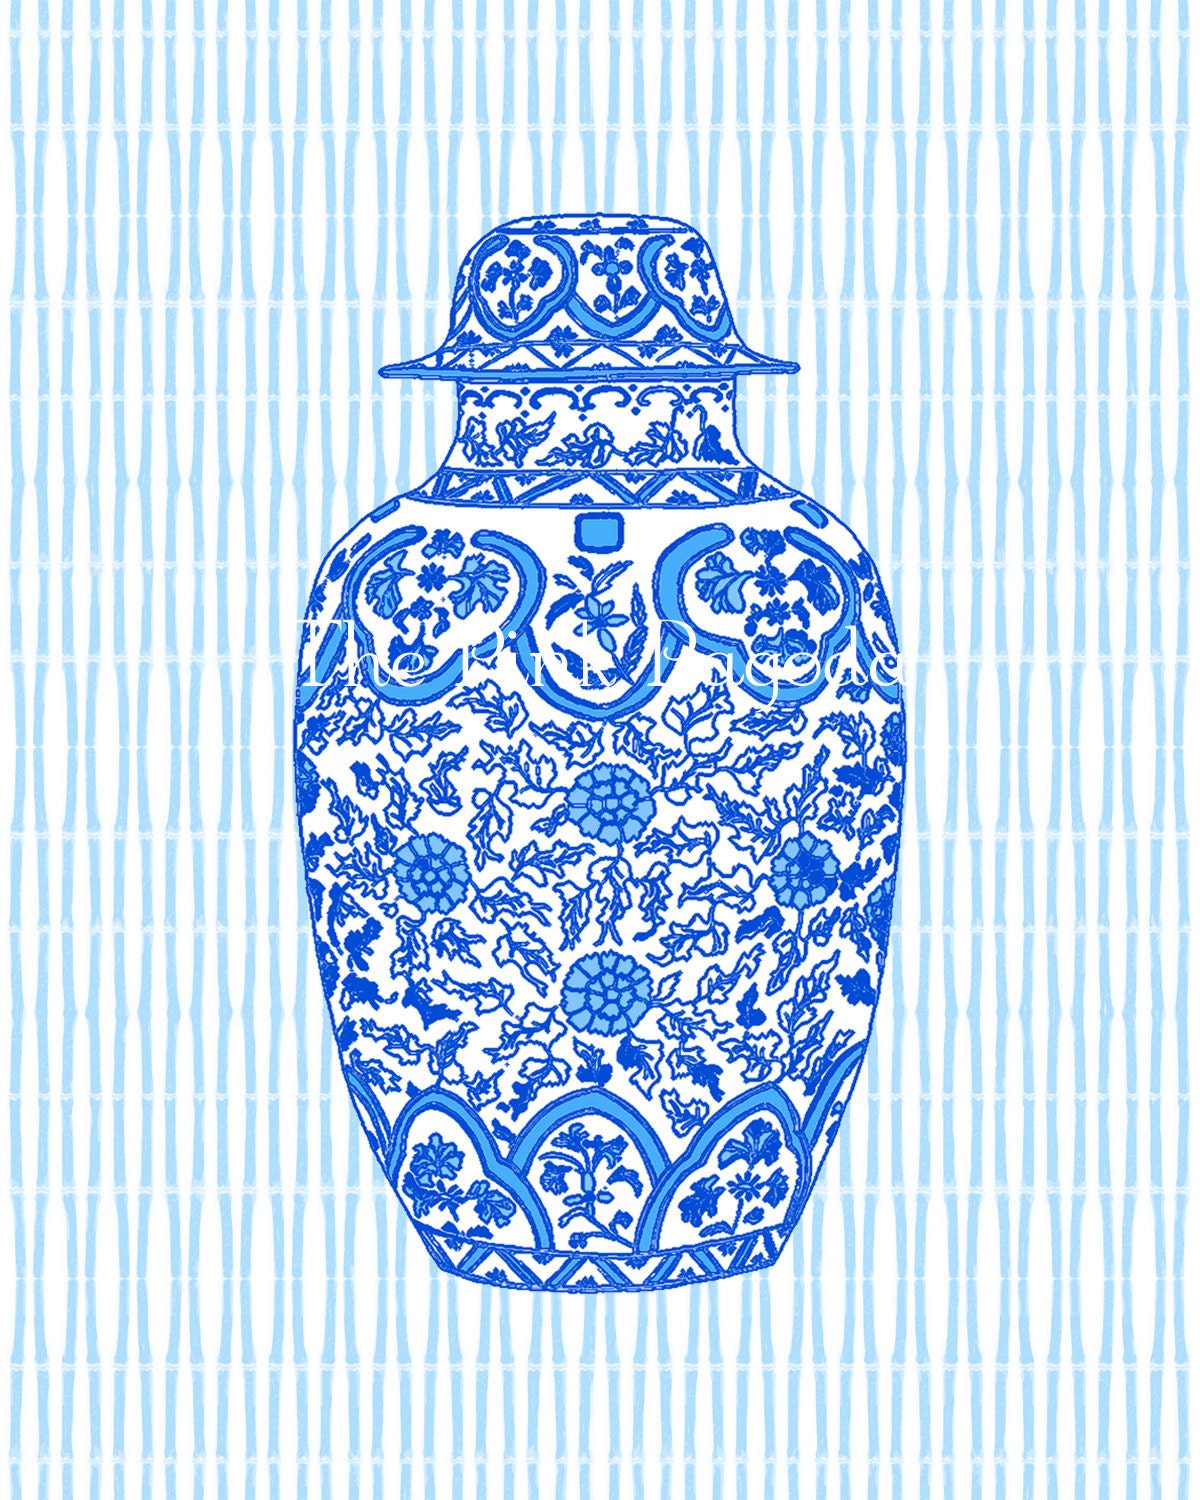 Ming Blue Chinoiserie Ginger Jar 8x10 Giclee